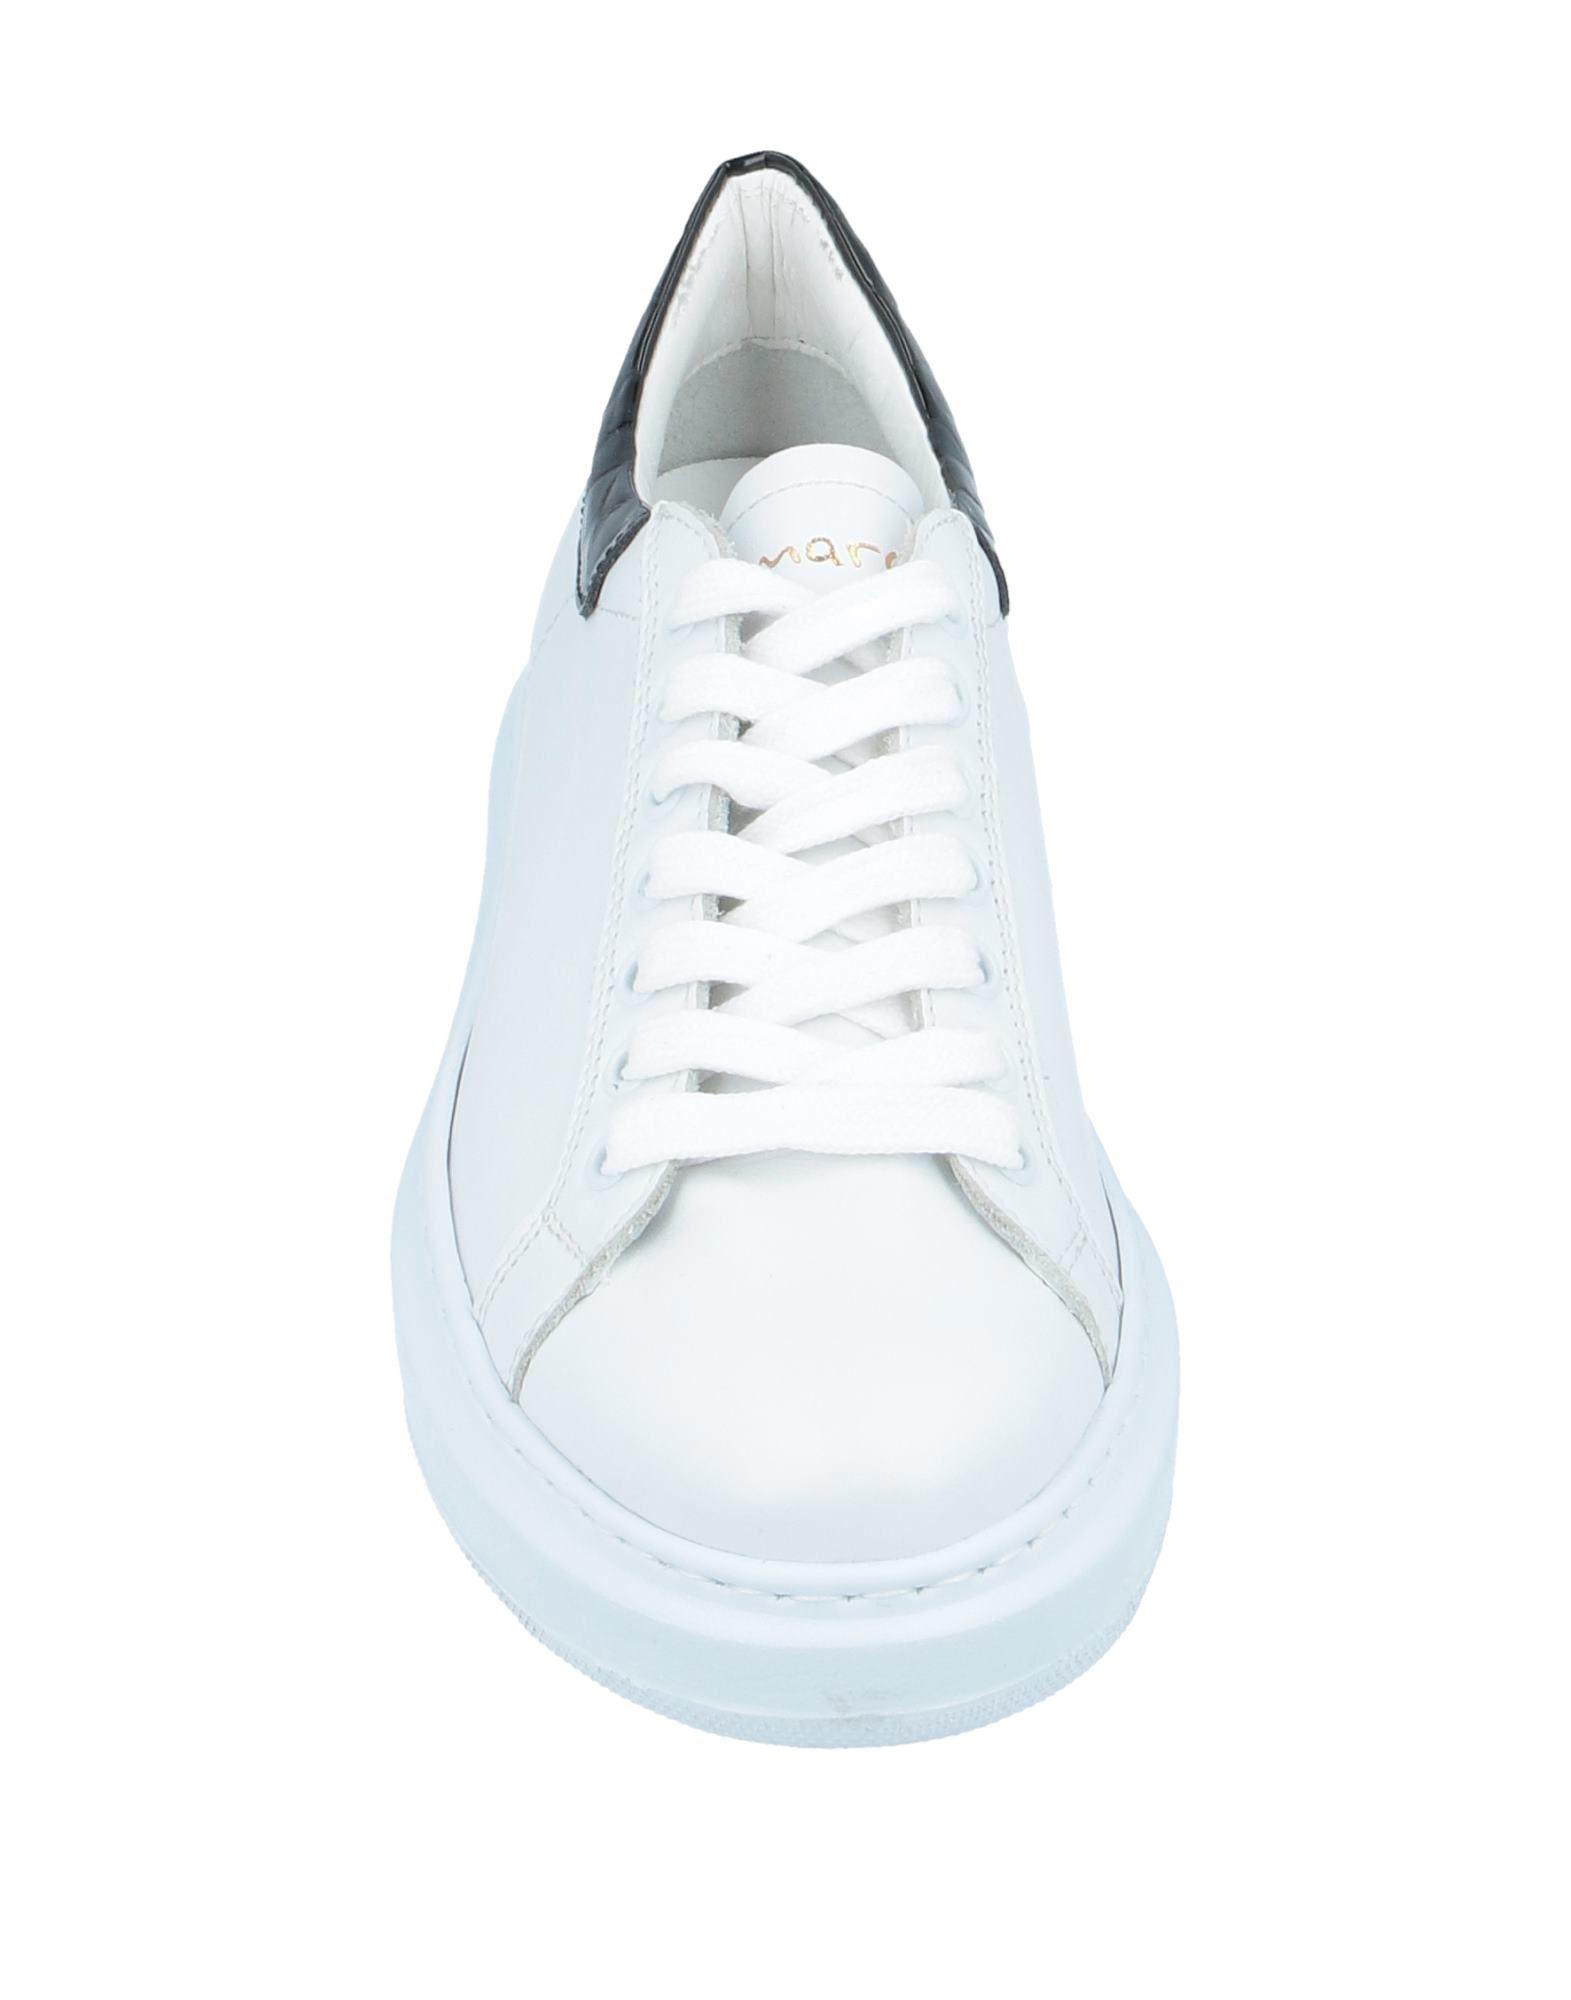 Lemarè Leather Trainers in White - Lyst